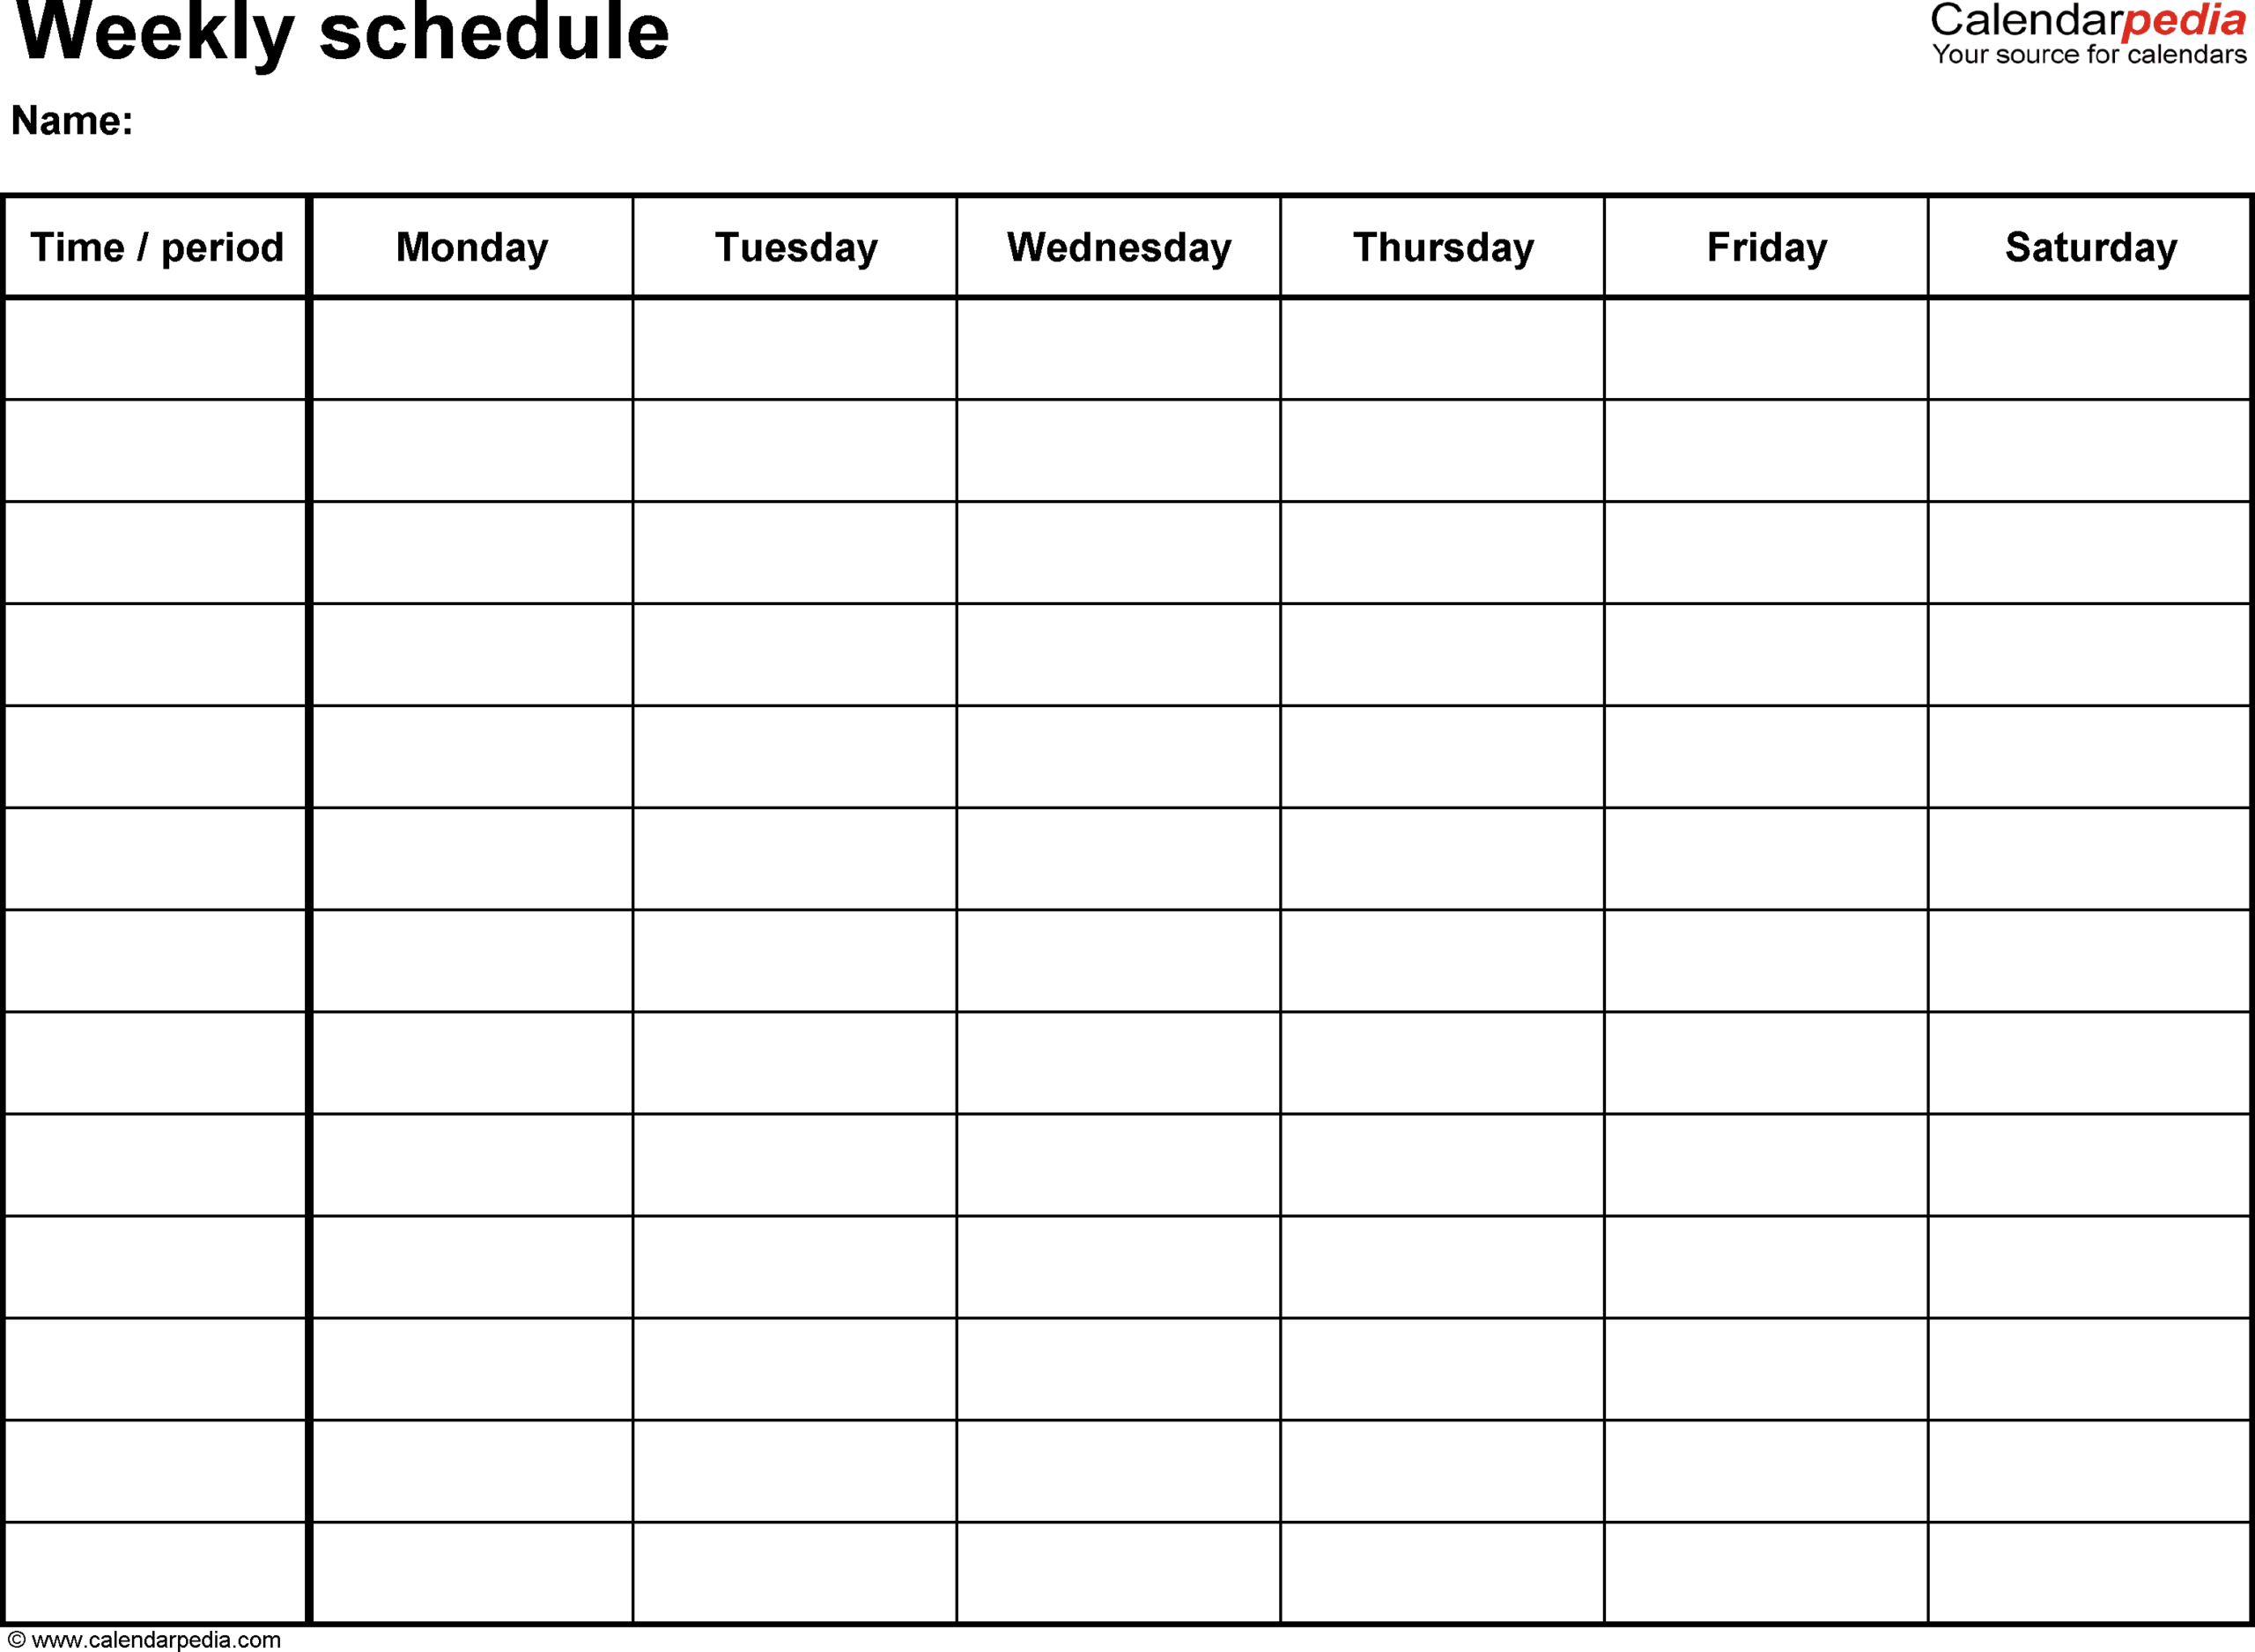 Free Weekly Schedule Templates For Excel – 18 Templates With Regard To Monthly Meeting Schedule Template